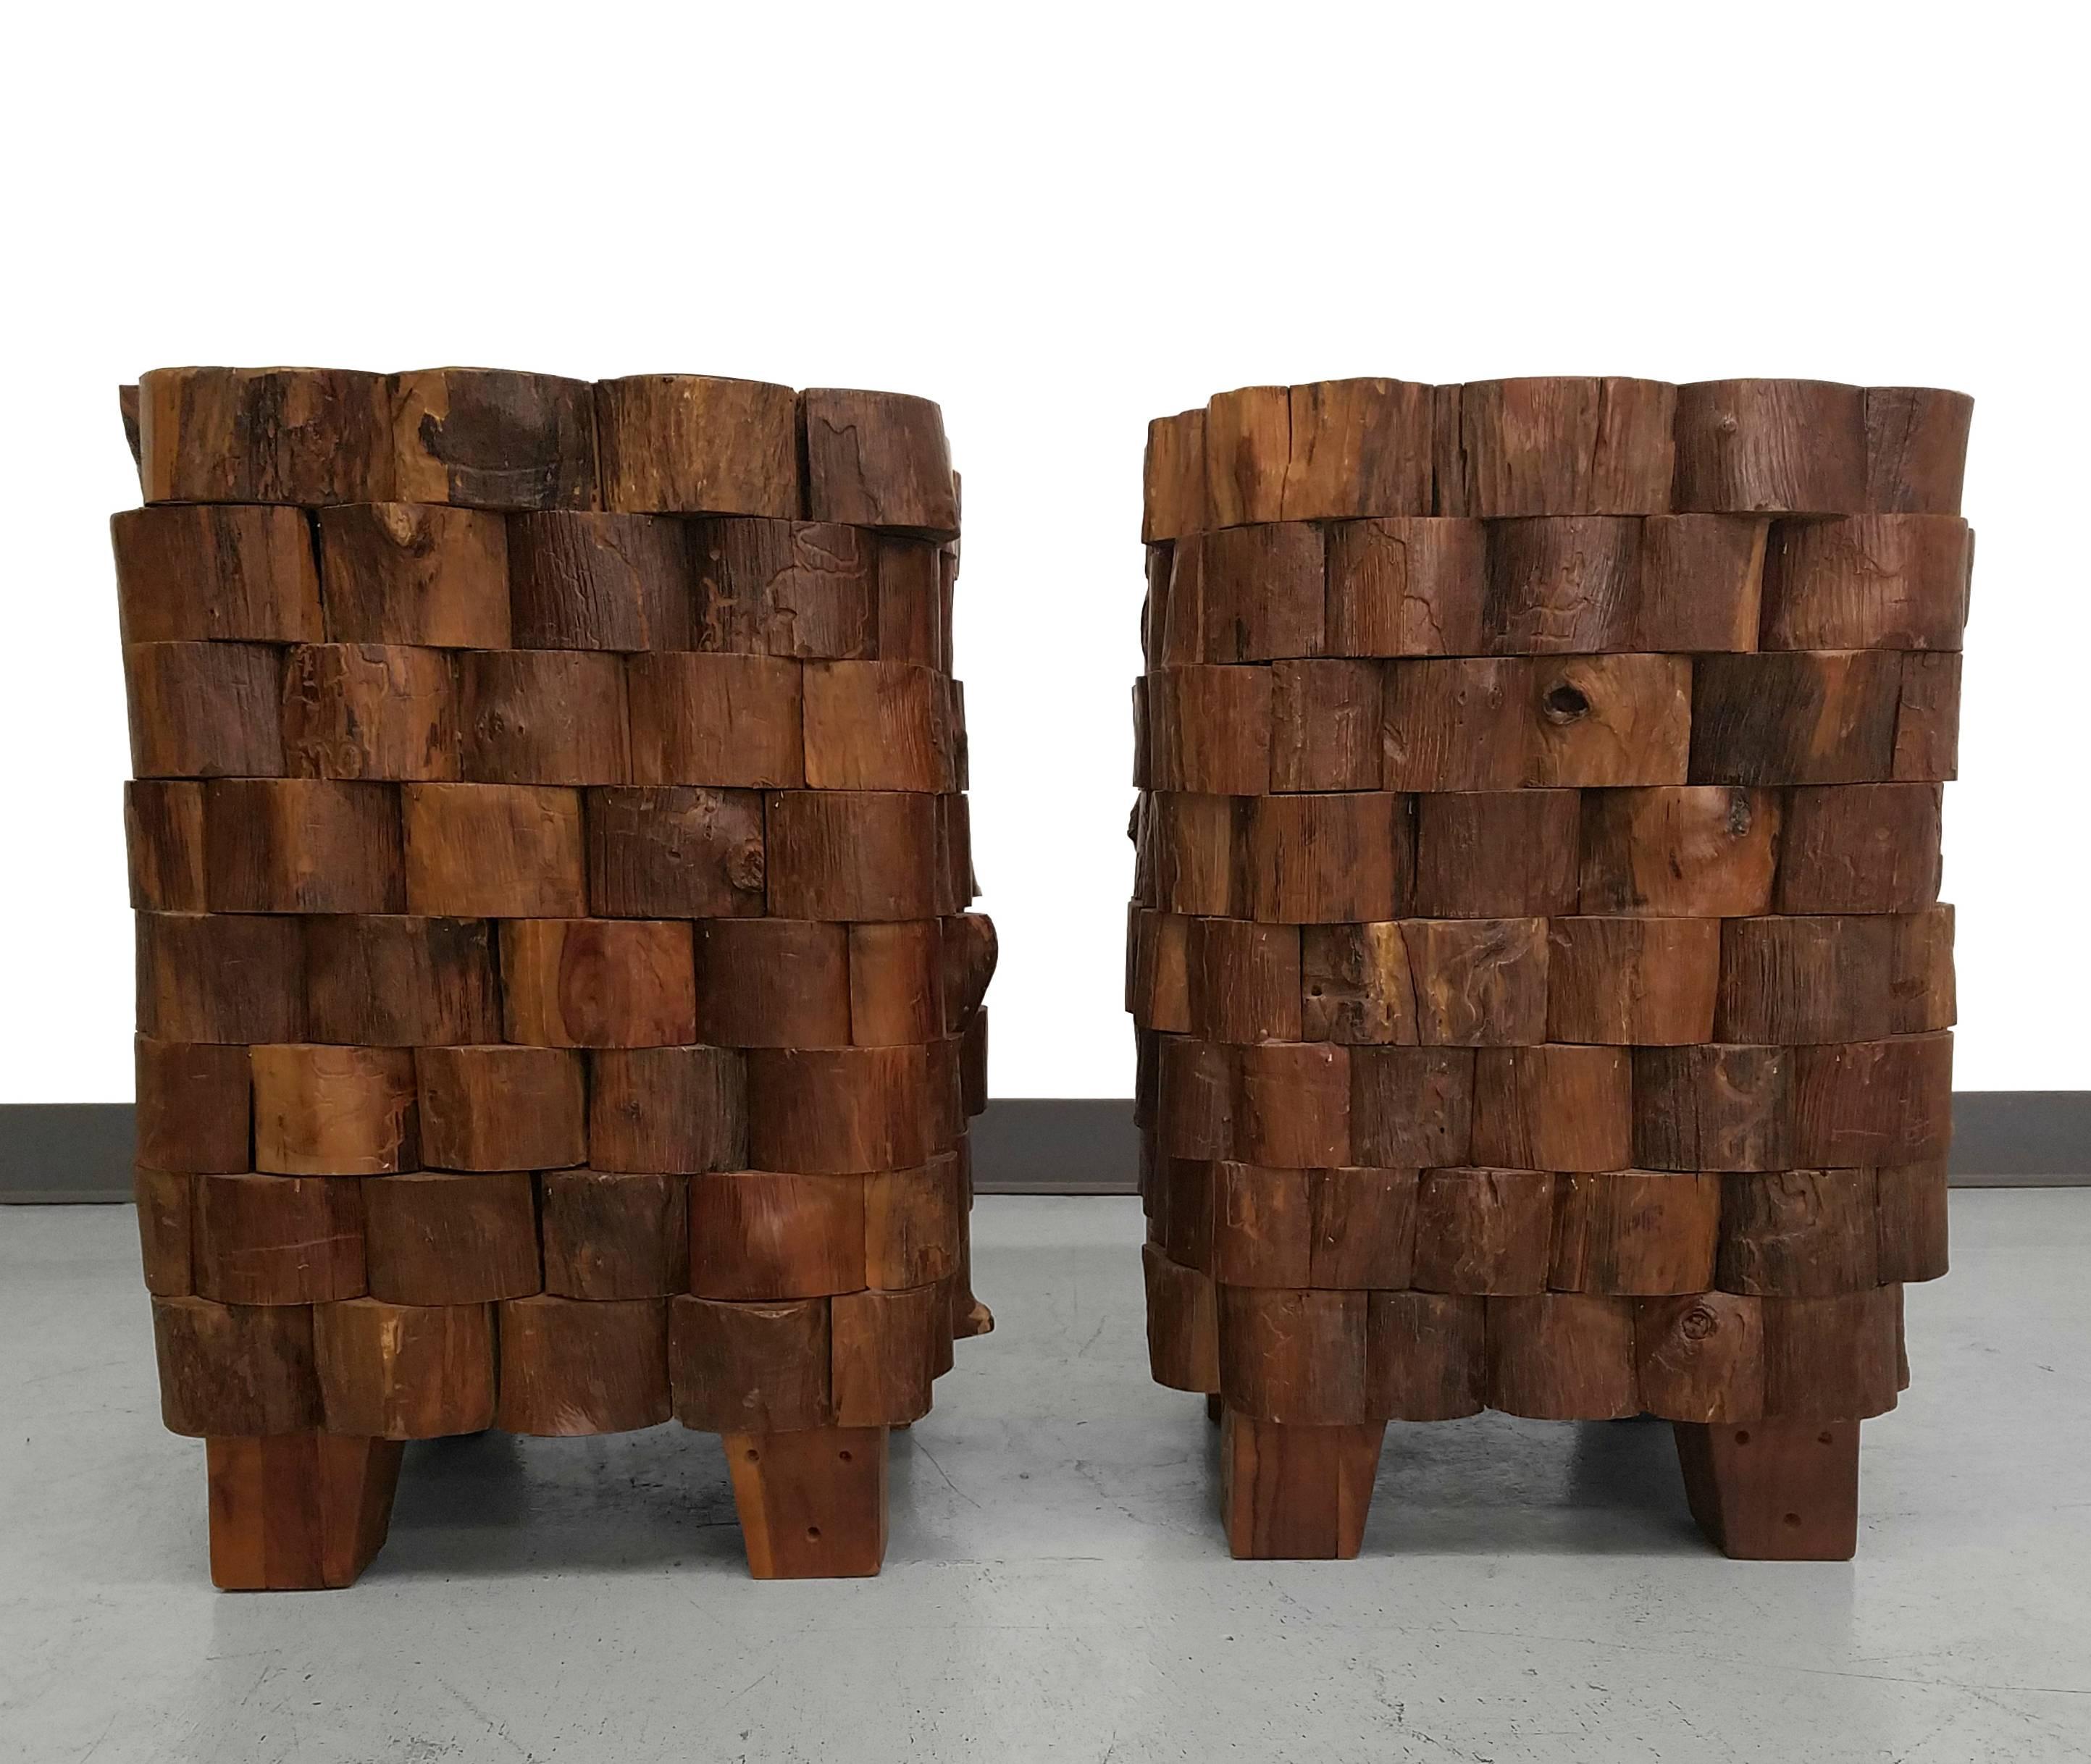 Extremely unique and possibly one of a kind pair of stacked wood side tables. These tables are comprised of many wood end cuts all stacked to make a very unique, extremely textured design element. These are that eclectic conversation piece that